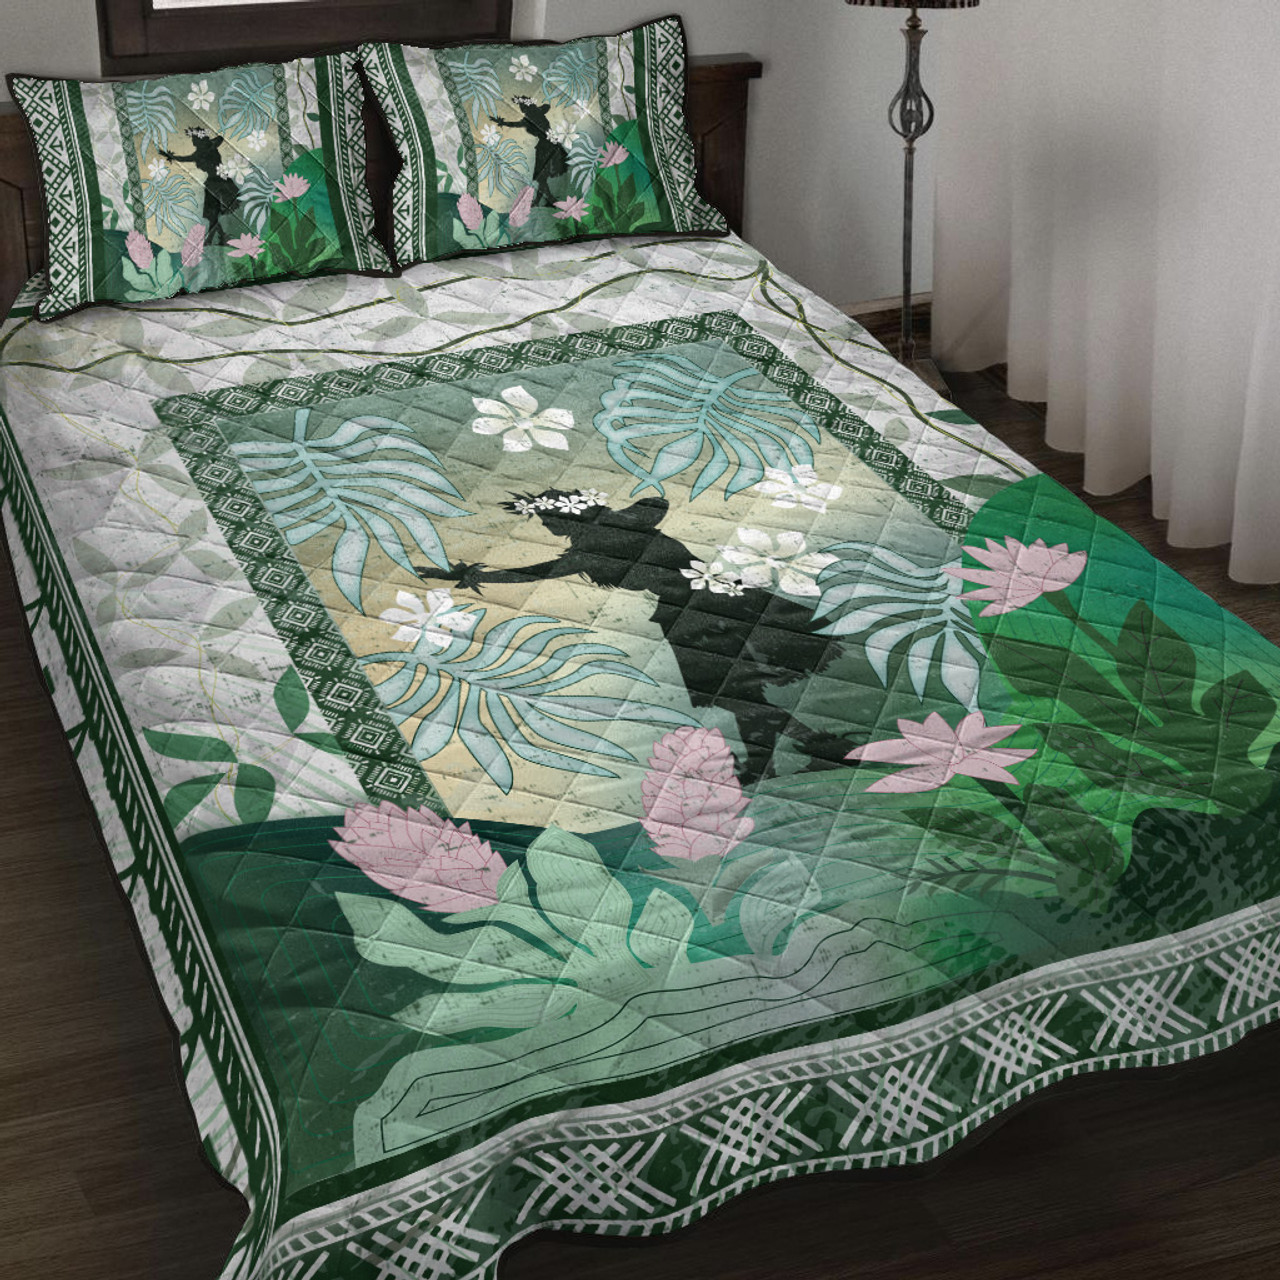 Hawaii Quilt Bed Set Hawaii Girl Hula Dancers With Tropical Flowers